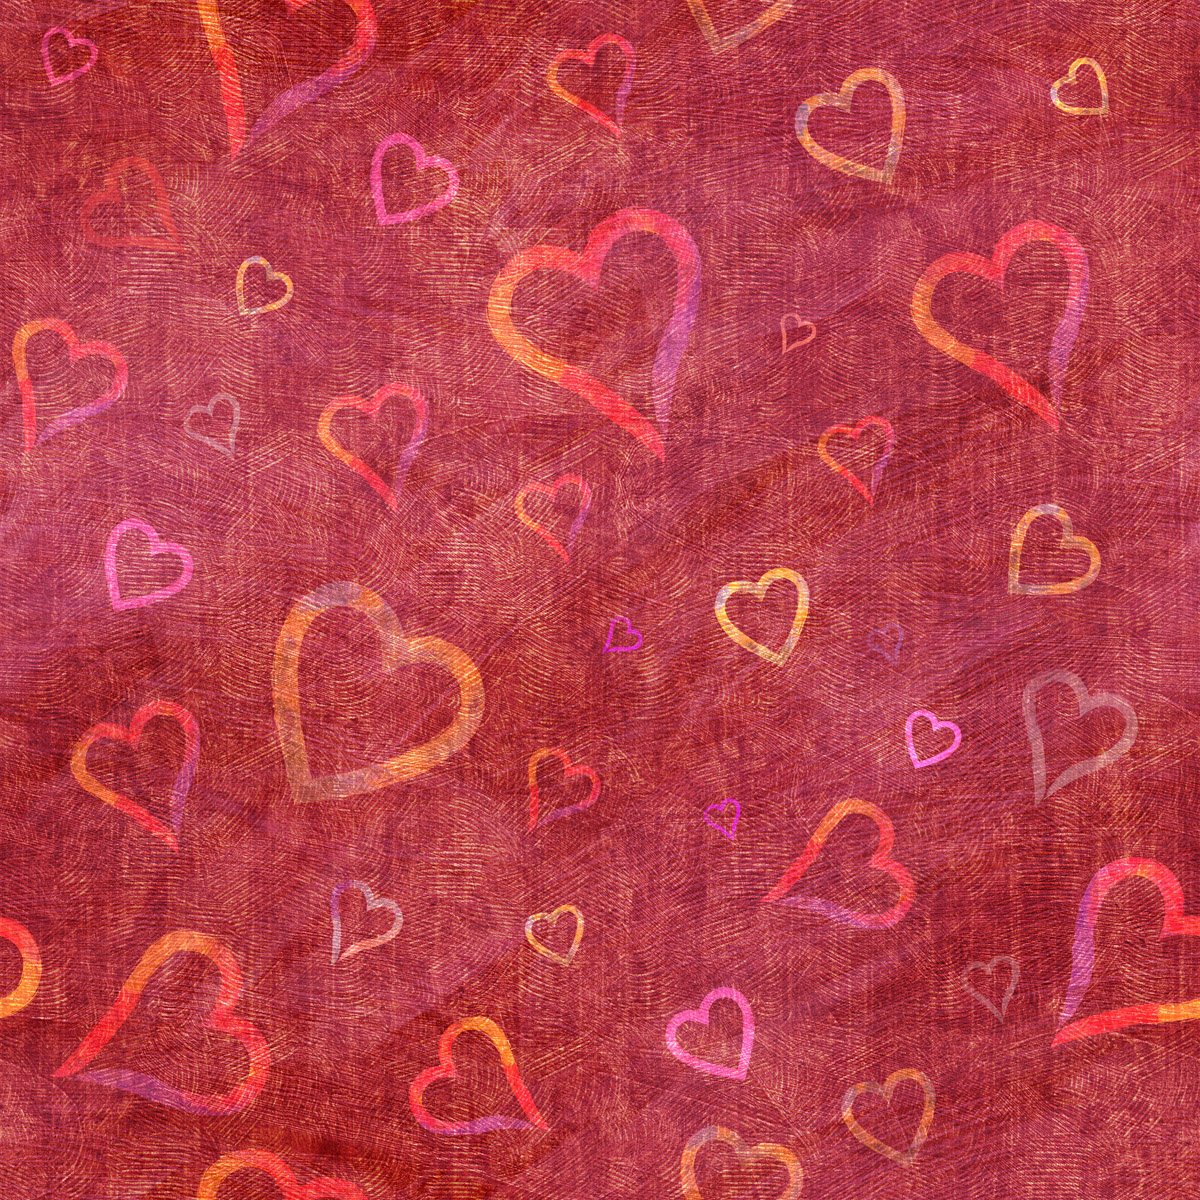 Hearts texture image